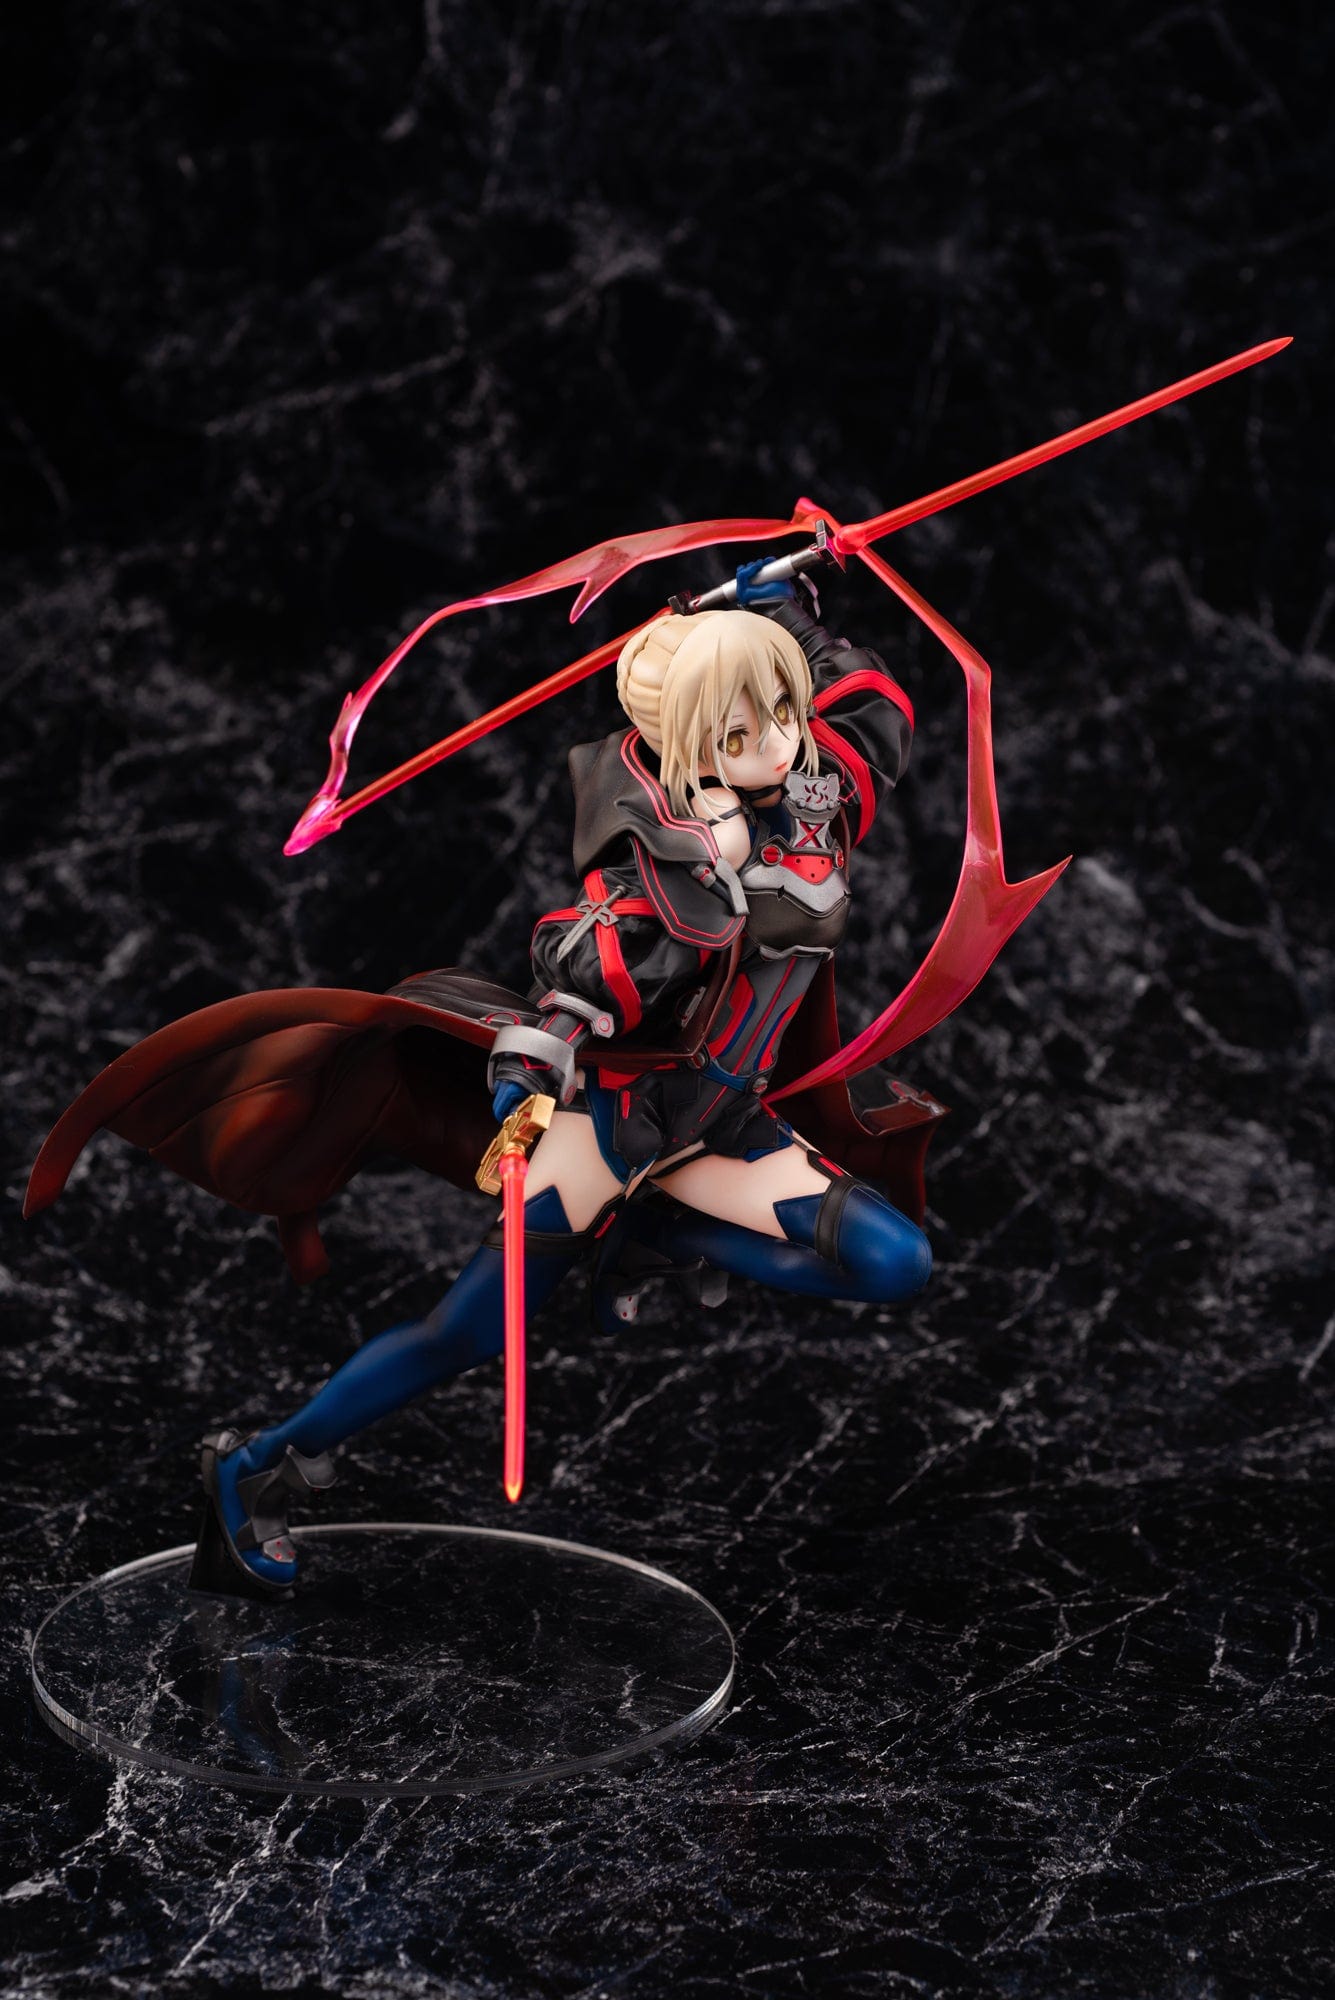 Aoshima Fate/Grand Order 1/7th Scale Mysterious Heroine X Alter